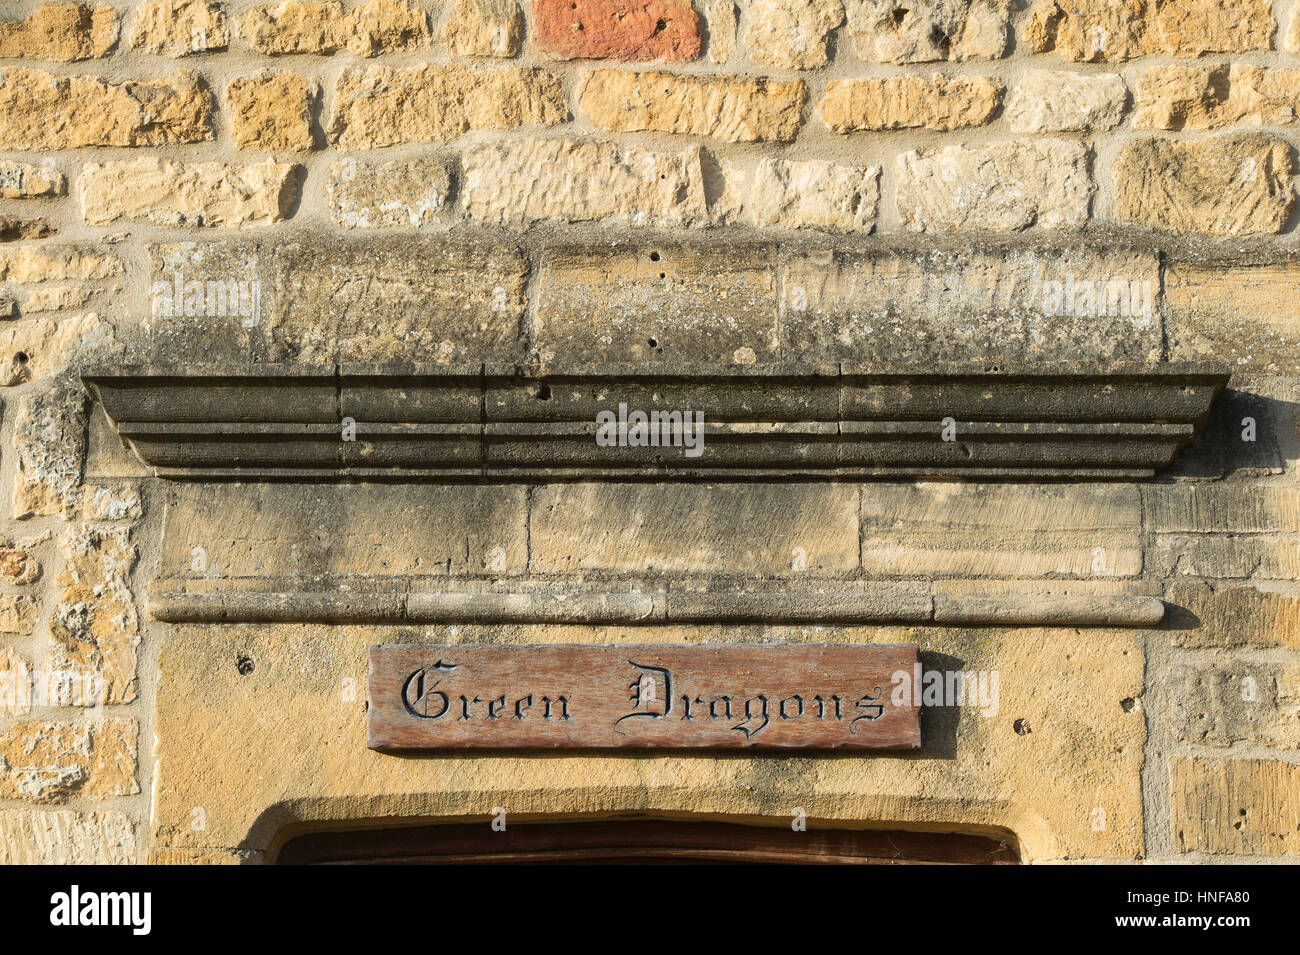 Dragons vert chambre signe. Chipping Campden, Cotswolds, Gloucestershire, Angleterre Banque D'Images